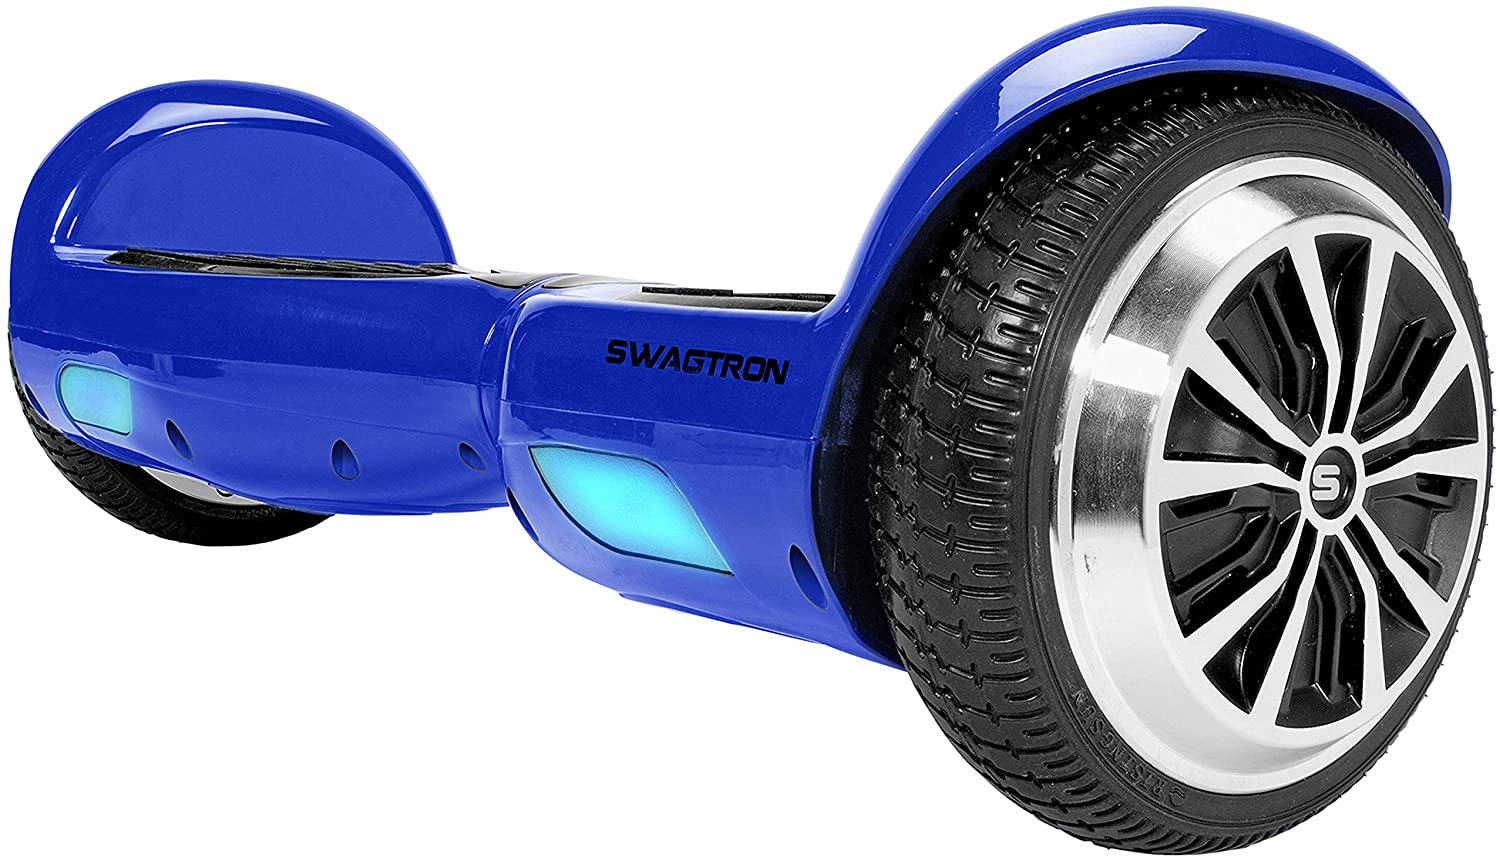 Swagtron Swagboard 500W Best Twist Hoverboard for Teenager